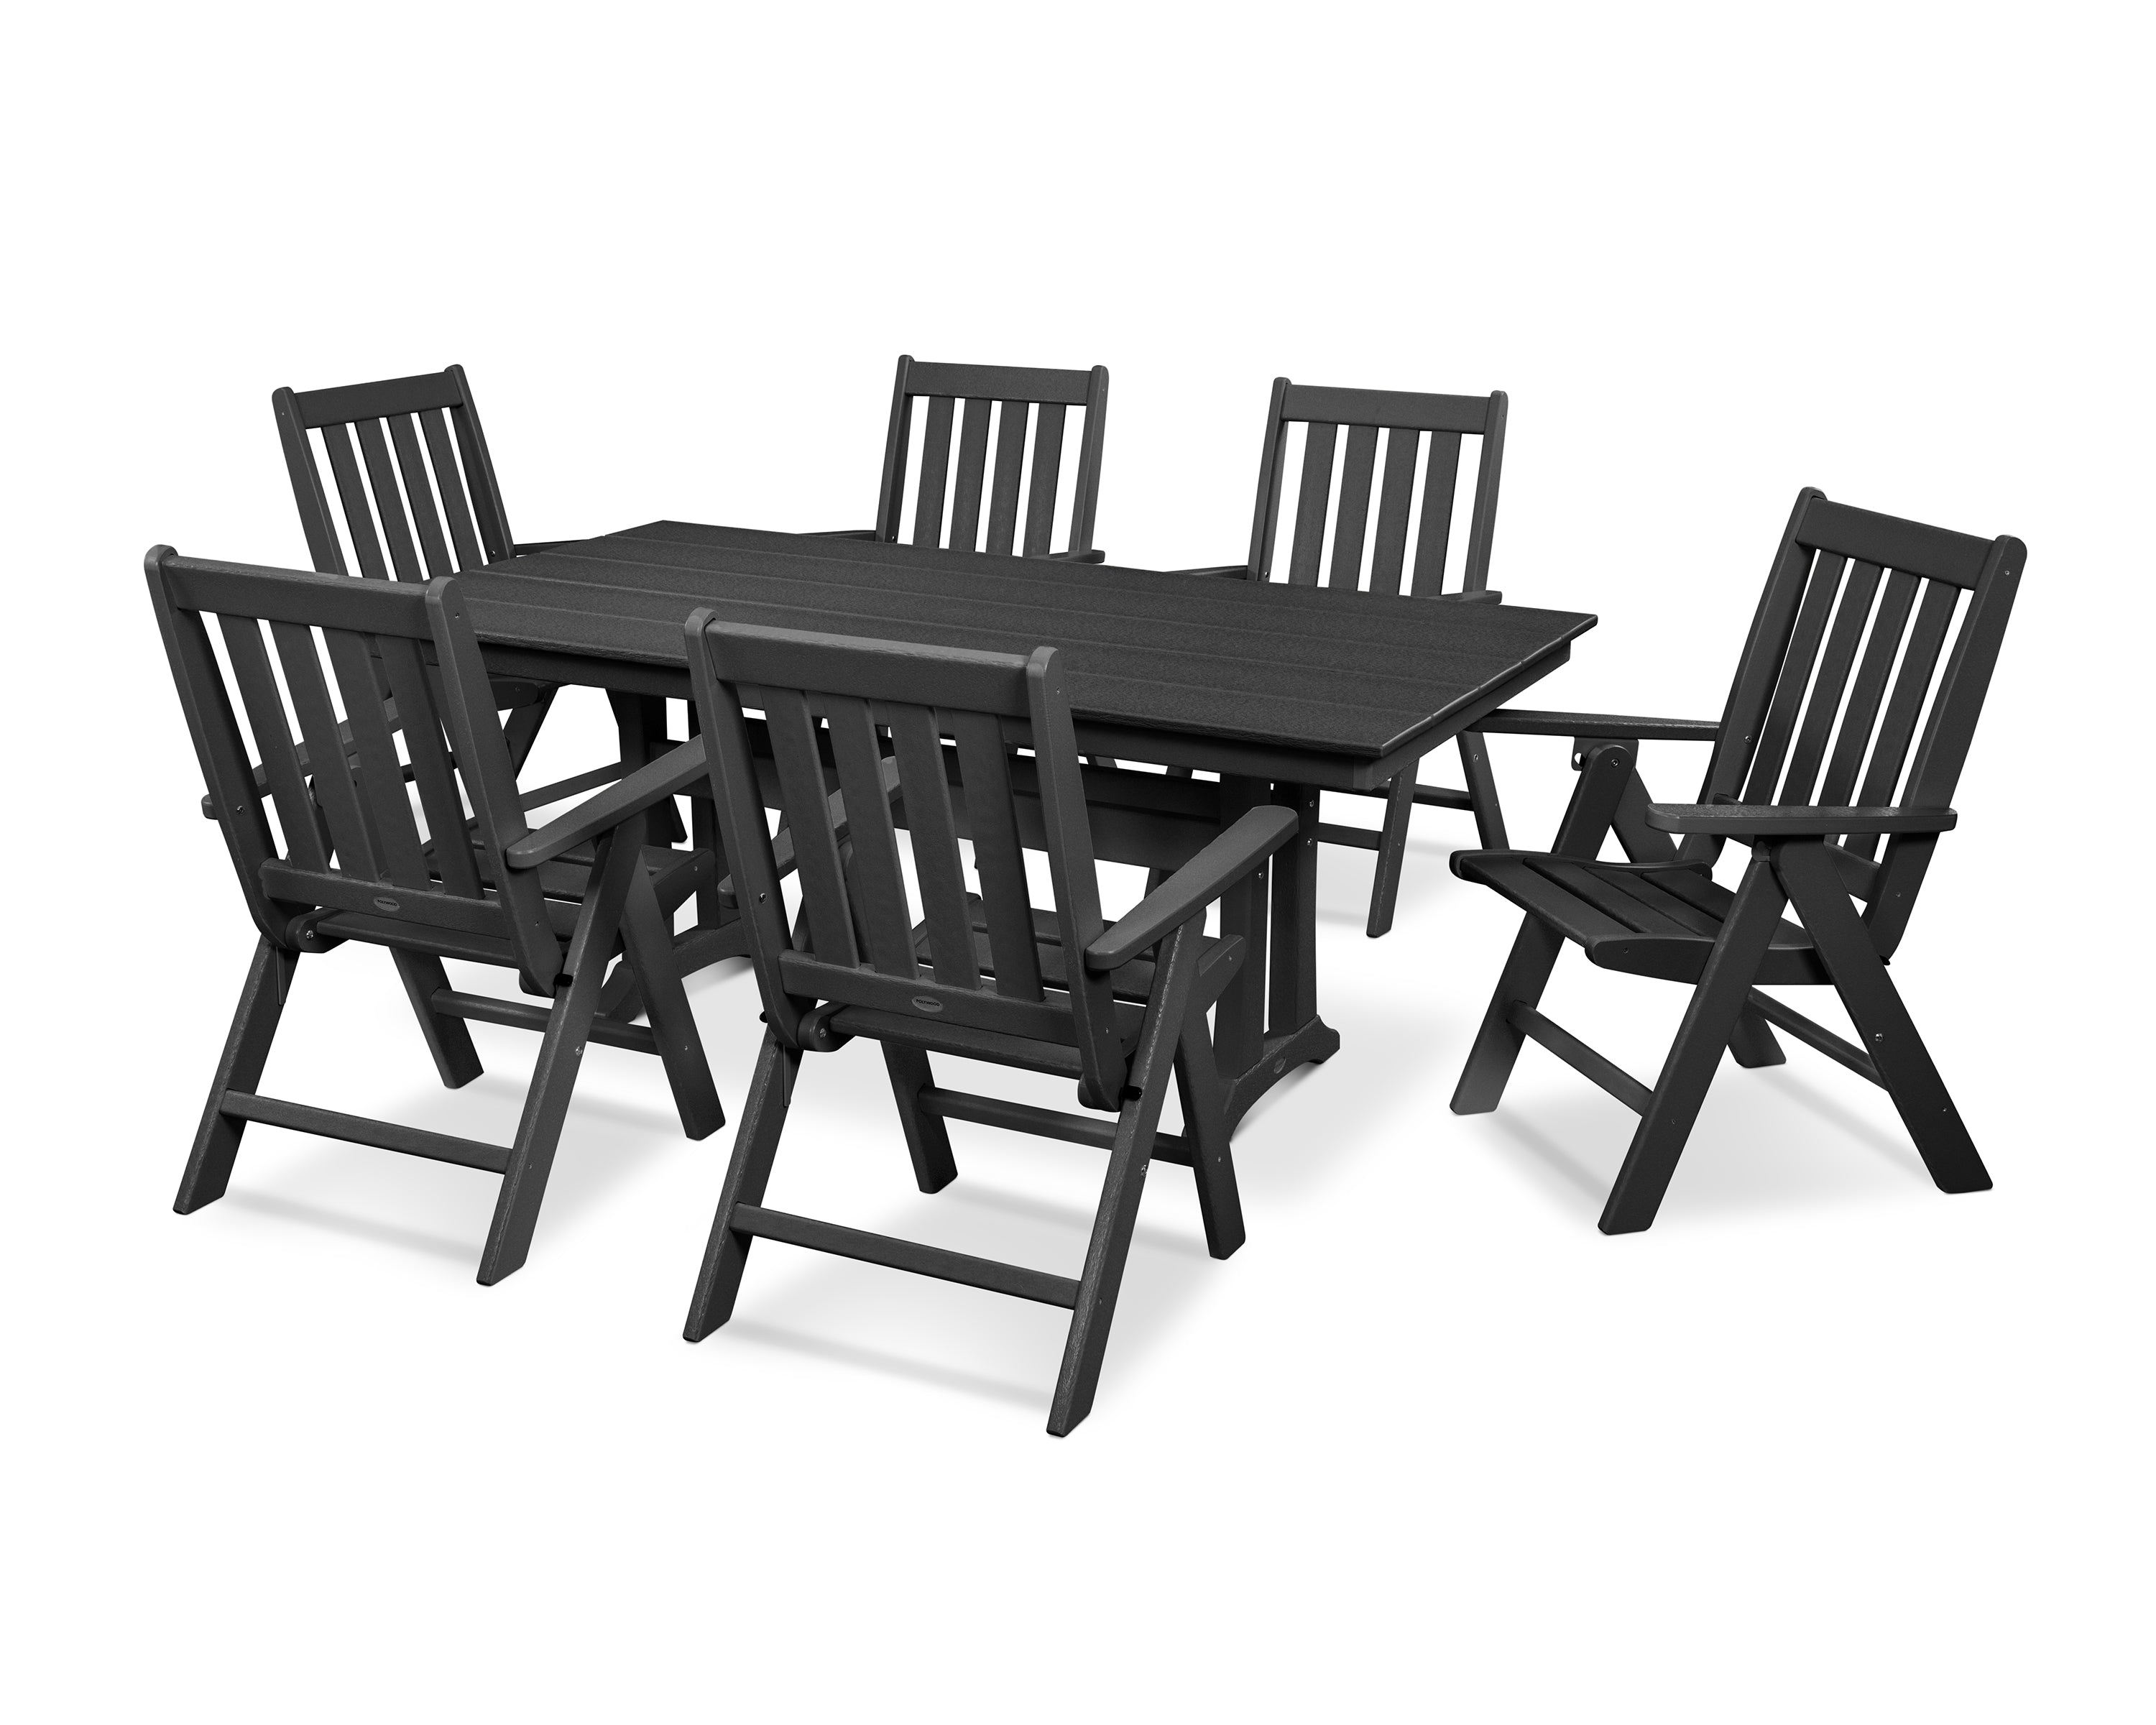 POLYWOOD® Vineyard Folding Chair 7-Piece Farmhouse Dining Set with Trestle Legs in Black